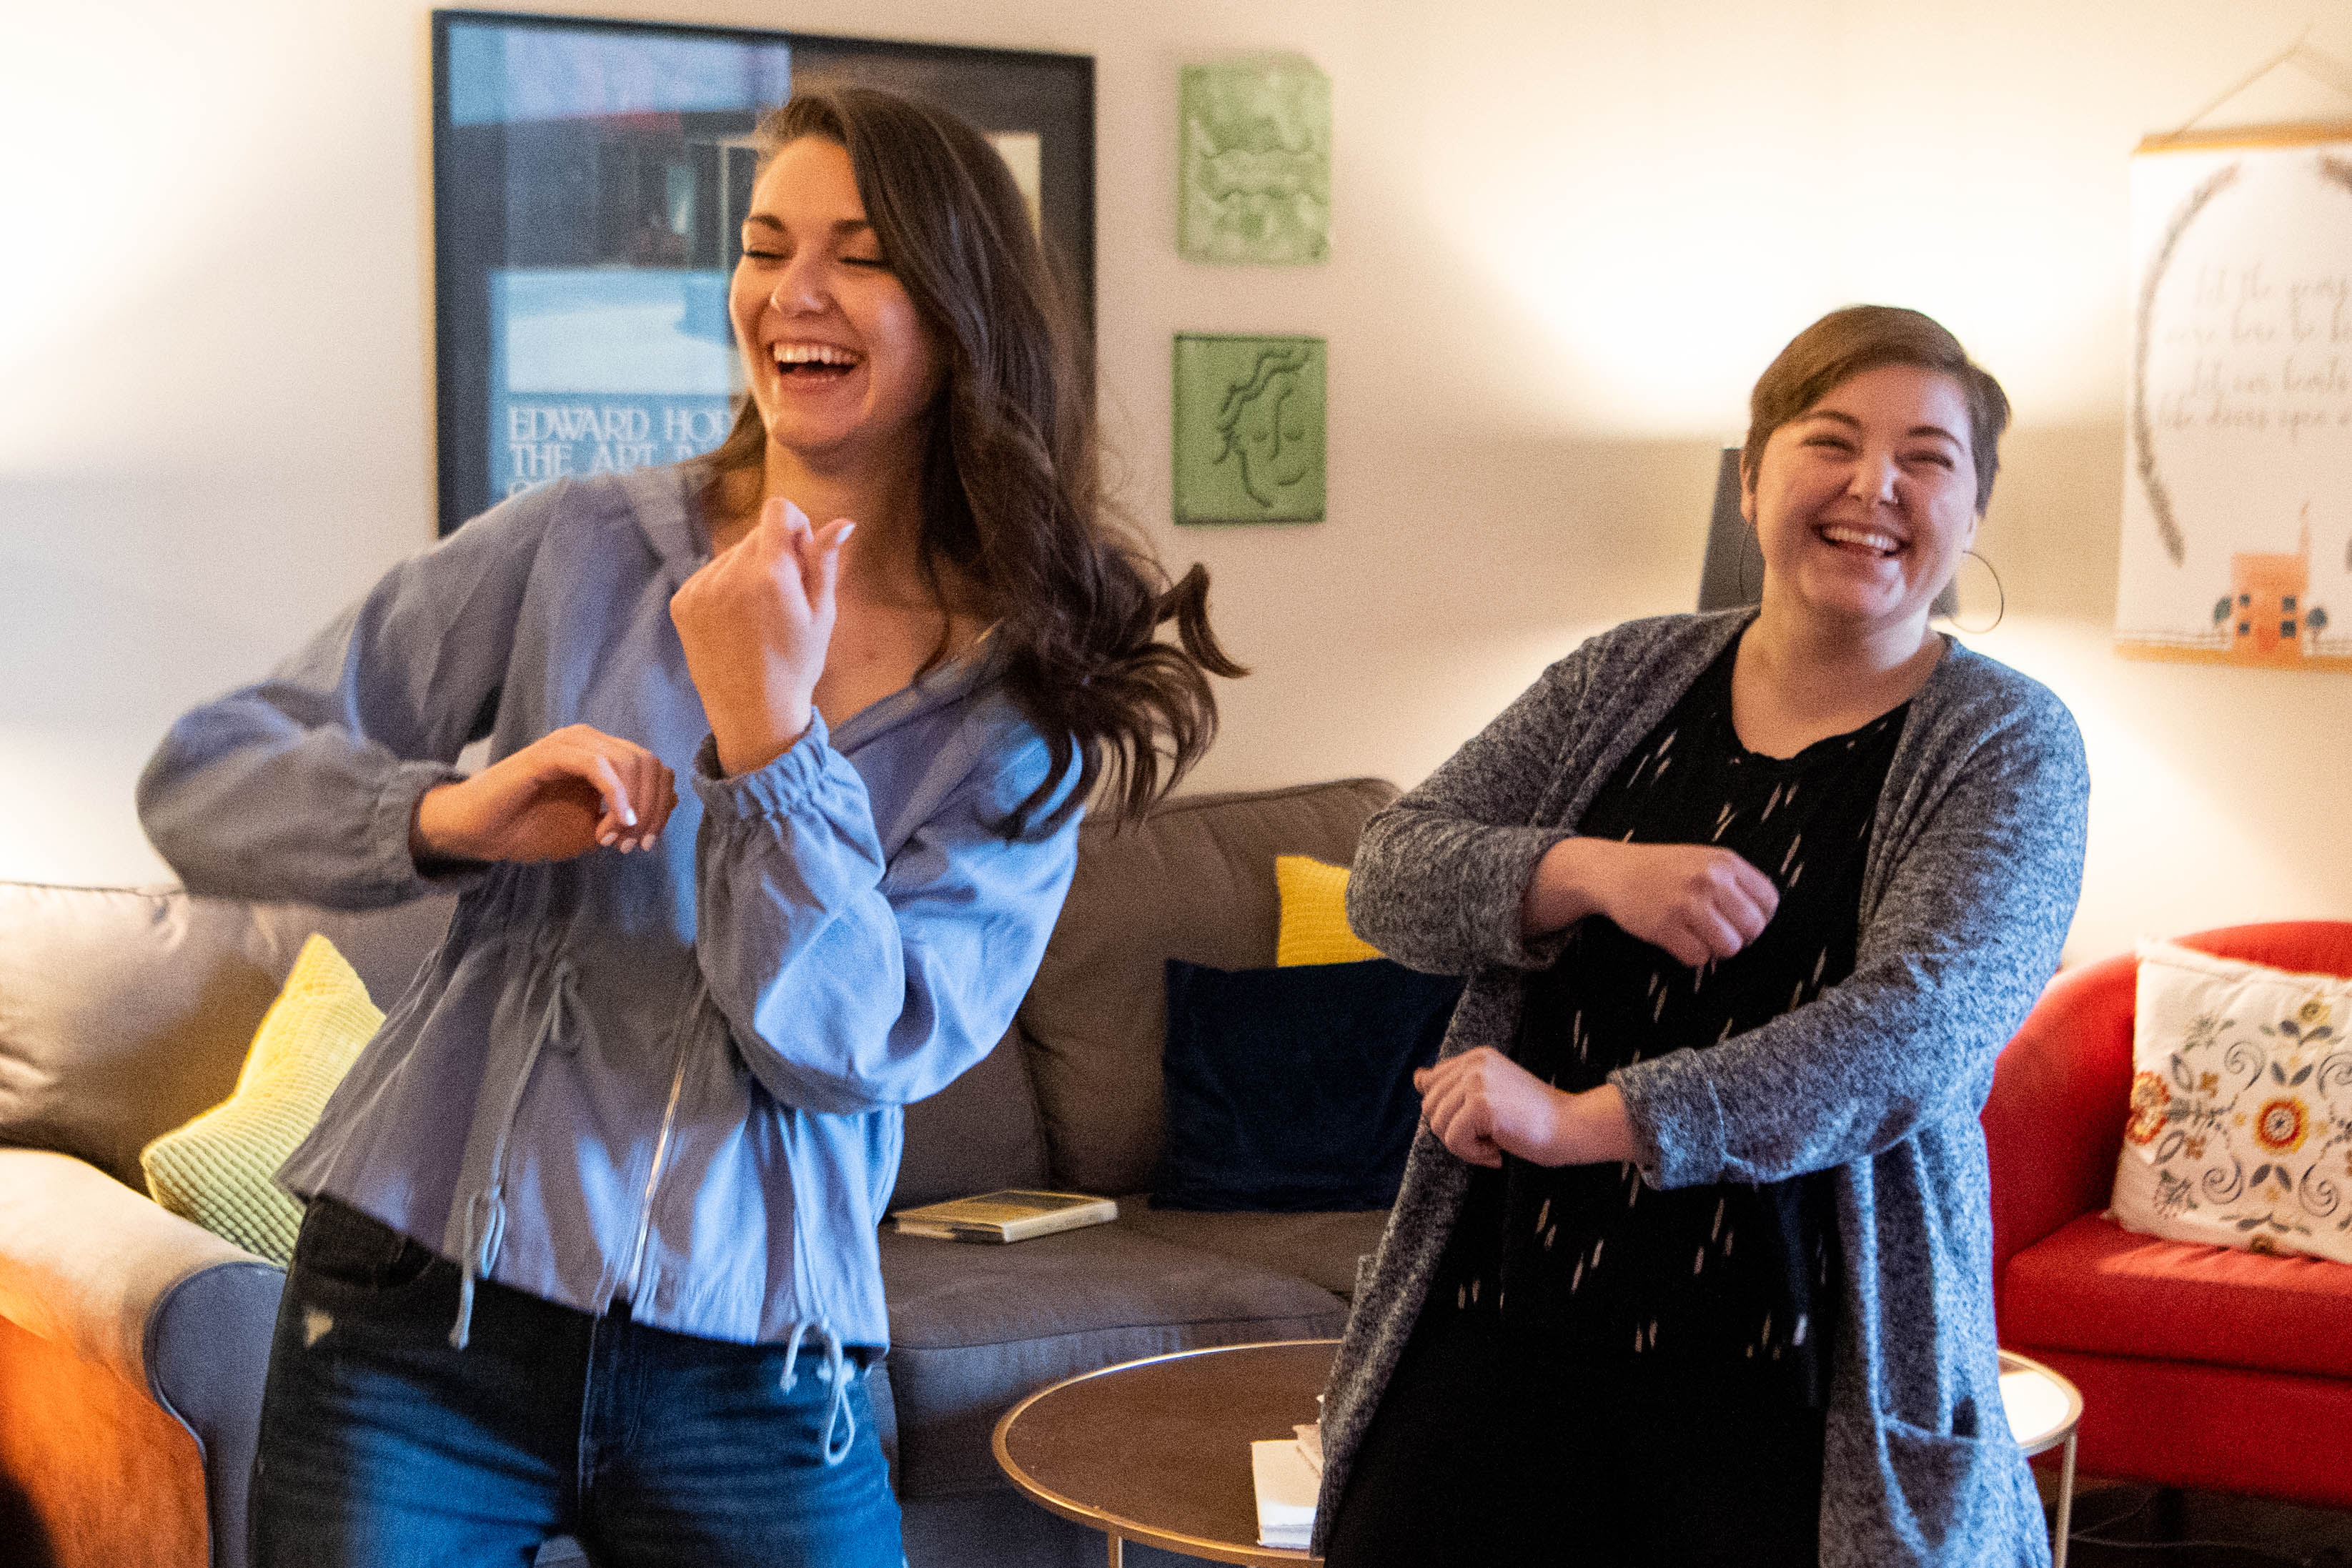 Katie Clinebell, left, and Ellen Wildman record themselves dancing to put on Instagram at their home Tuesday, March 24, 2020, in Brentwood, Tenn.